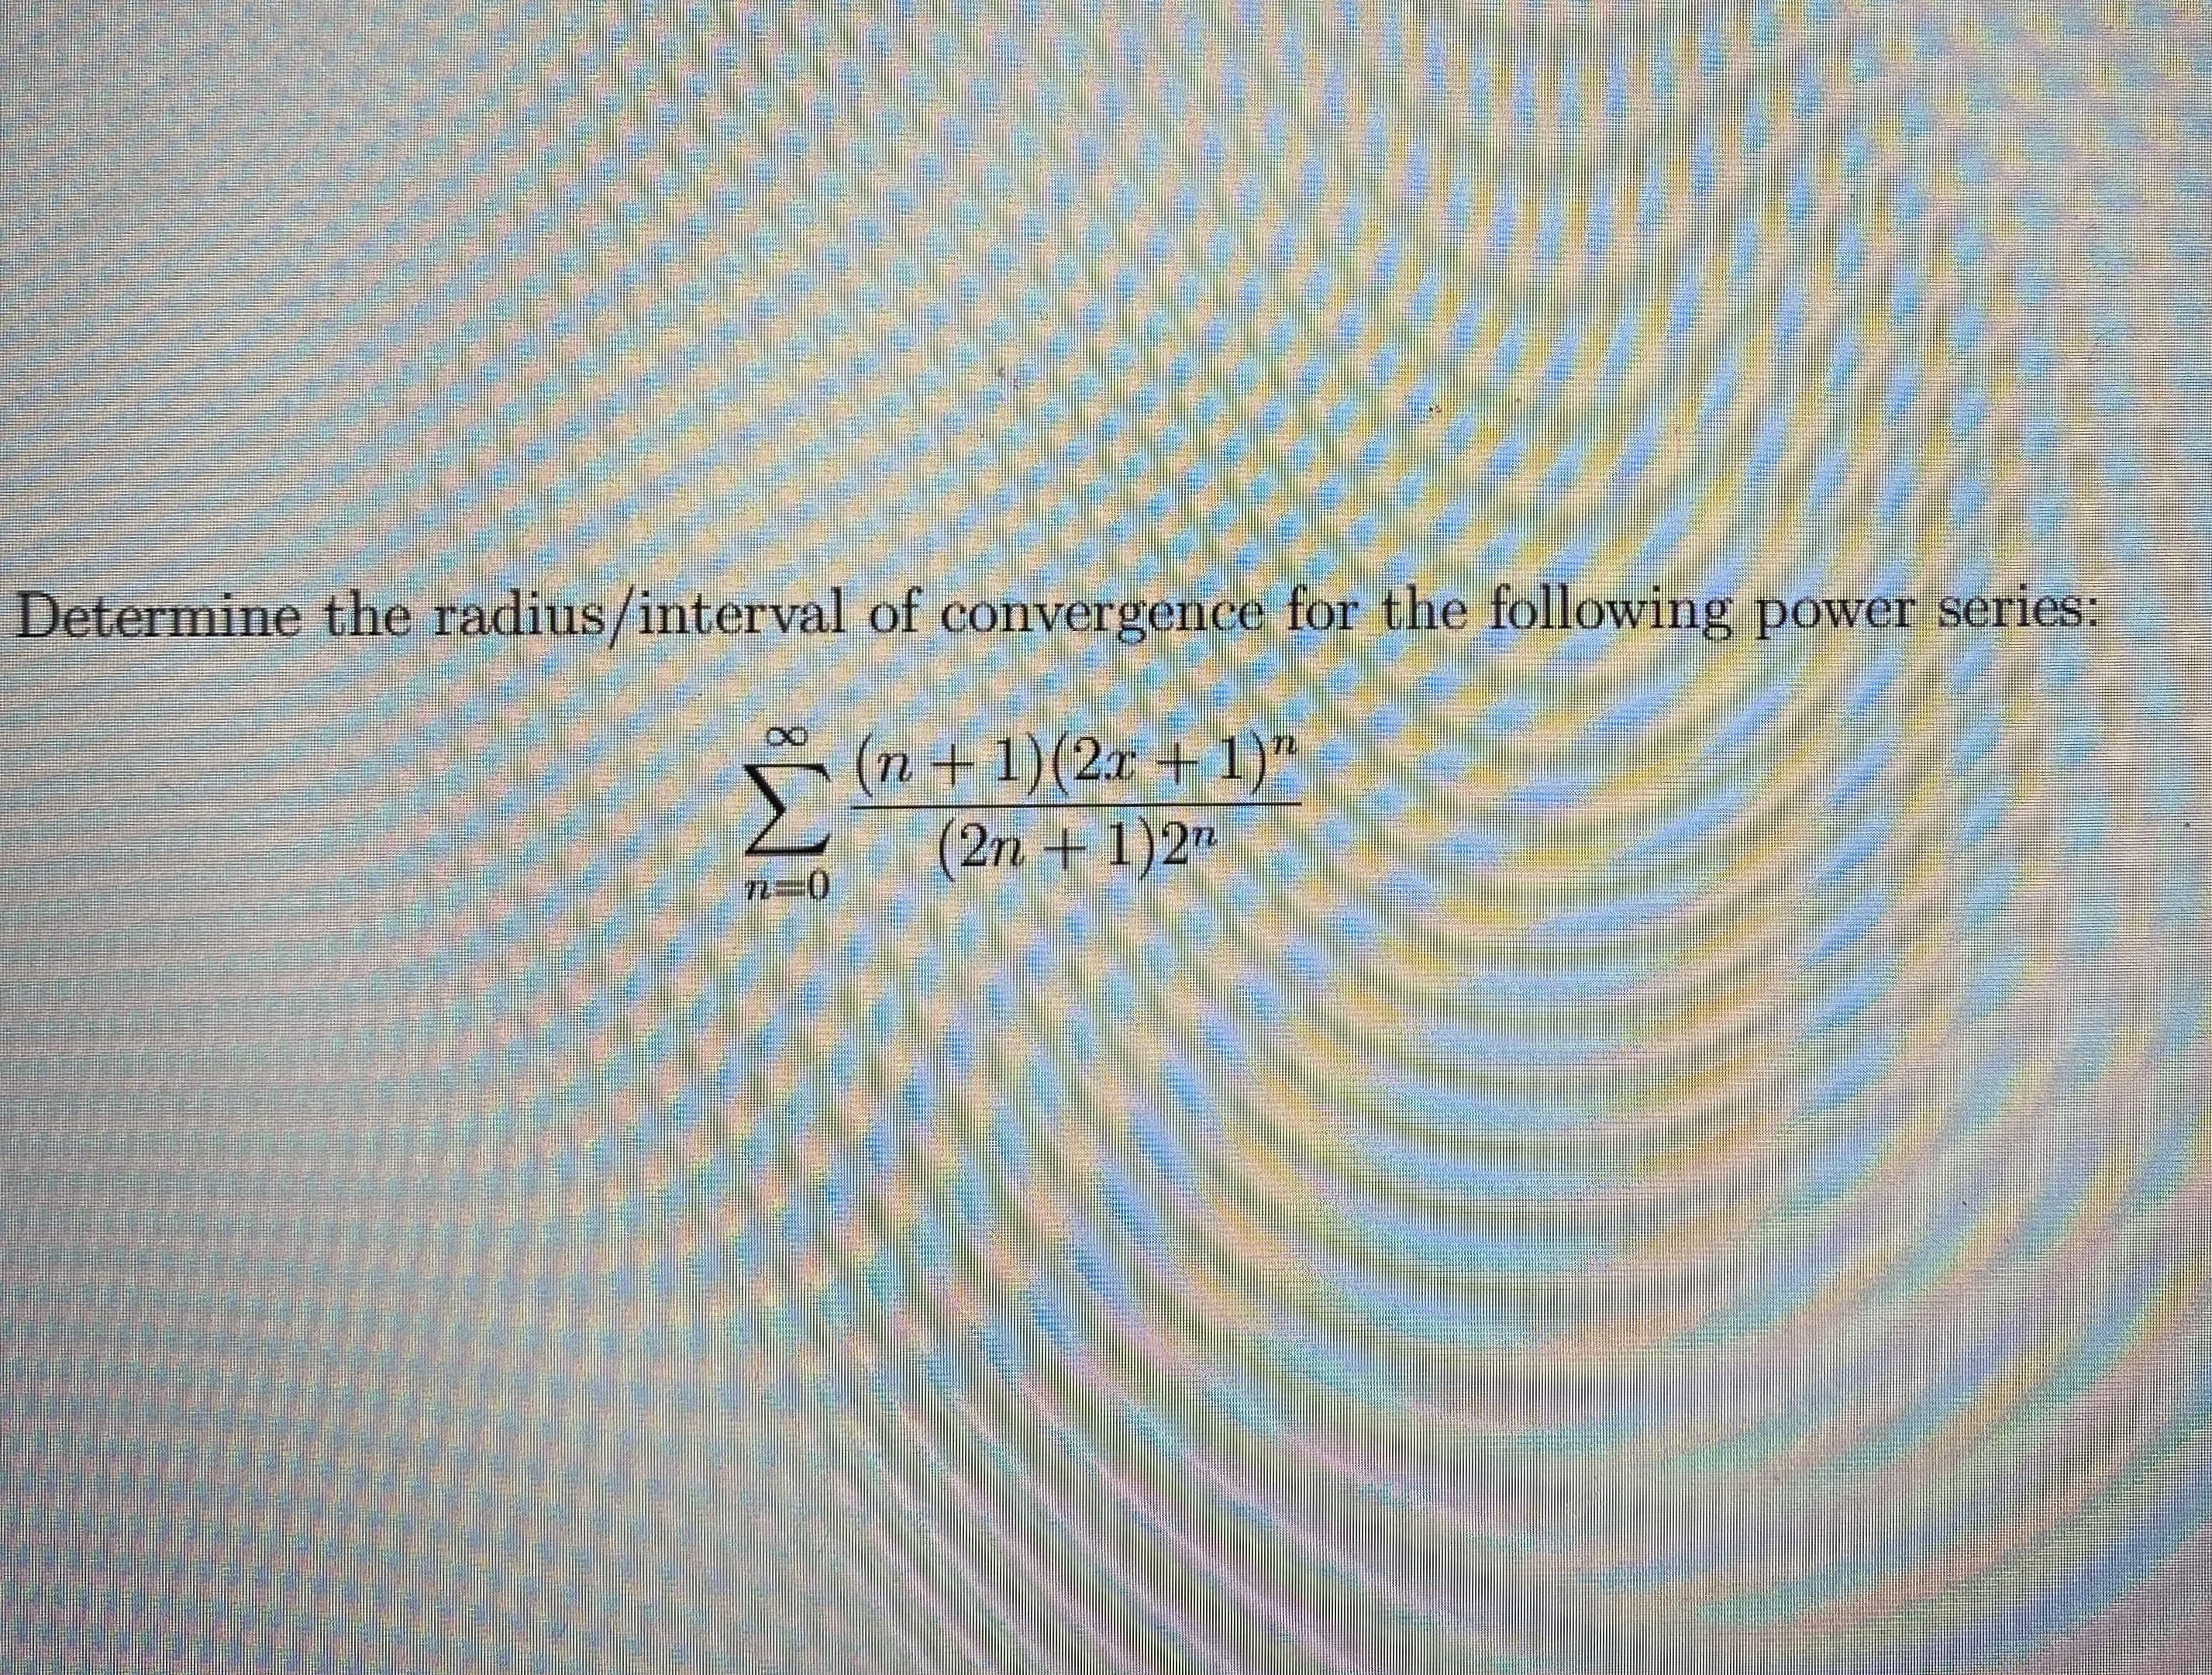 Determine the radius/interval of convergence for the following power series:
(n+1)(2x + 1)"
(2n+1)2"
